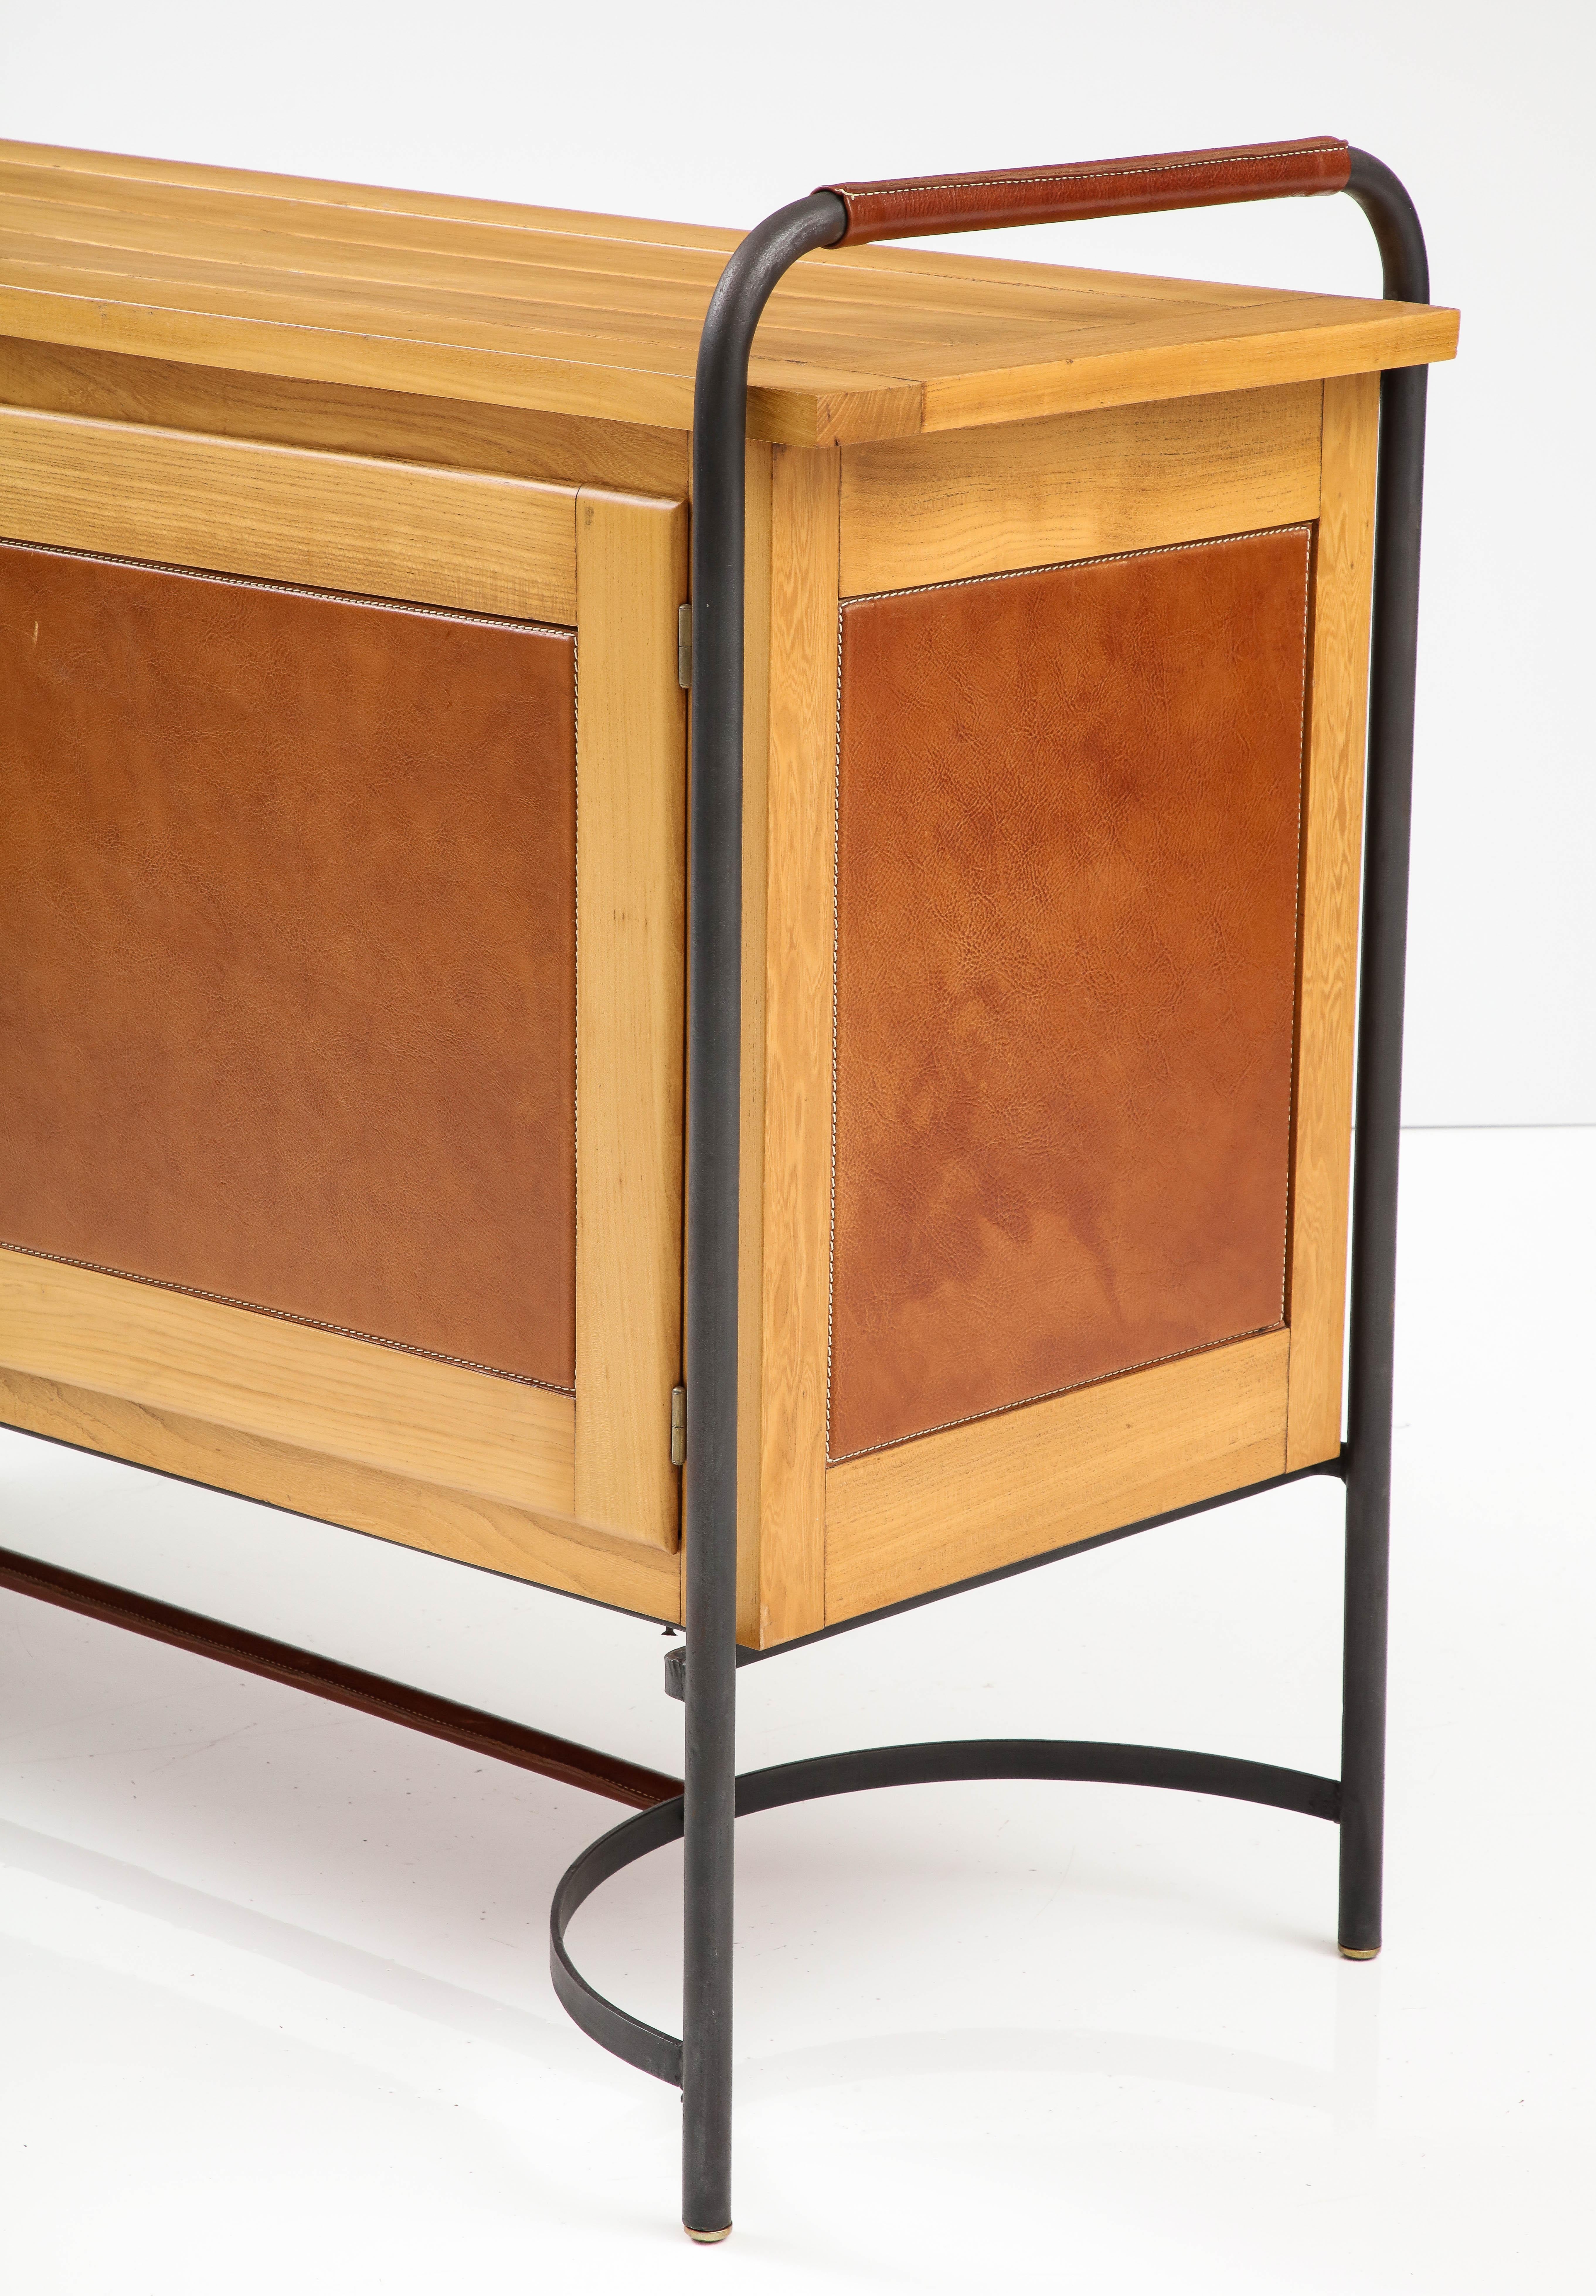 Leather Rare Equestrian-Style Cabinet by Jacques Adnet, France, c. 1950s